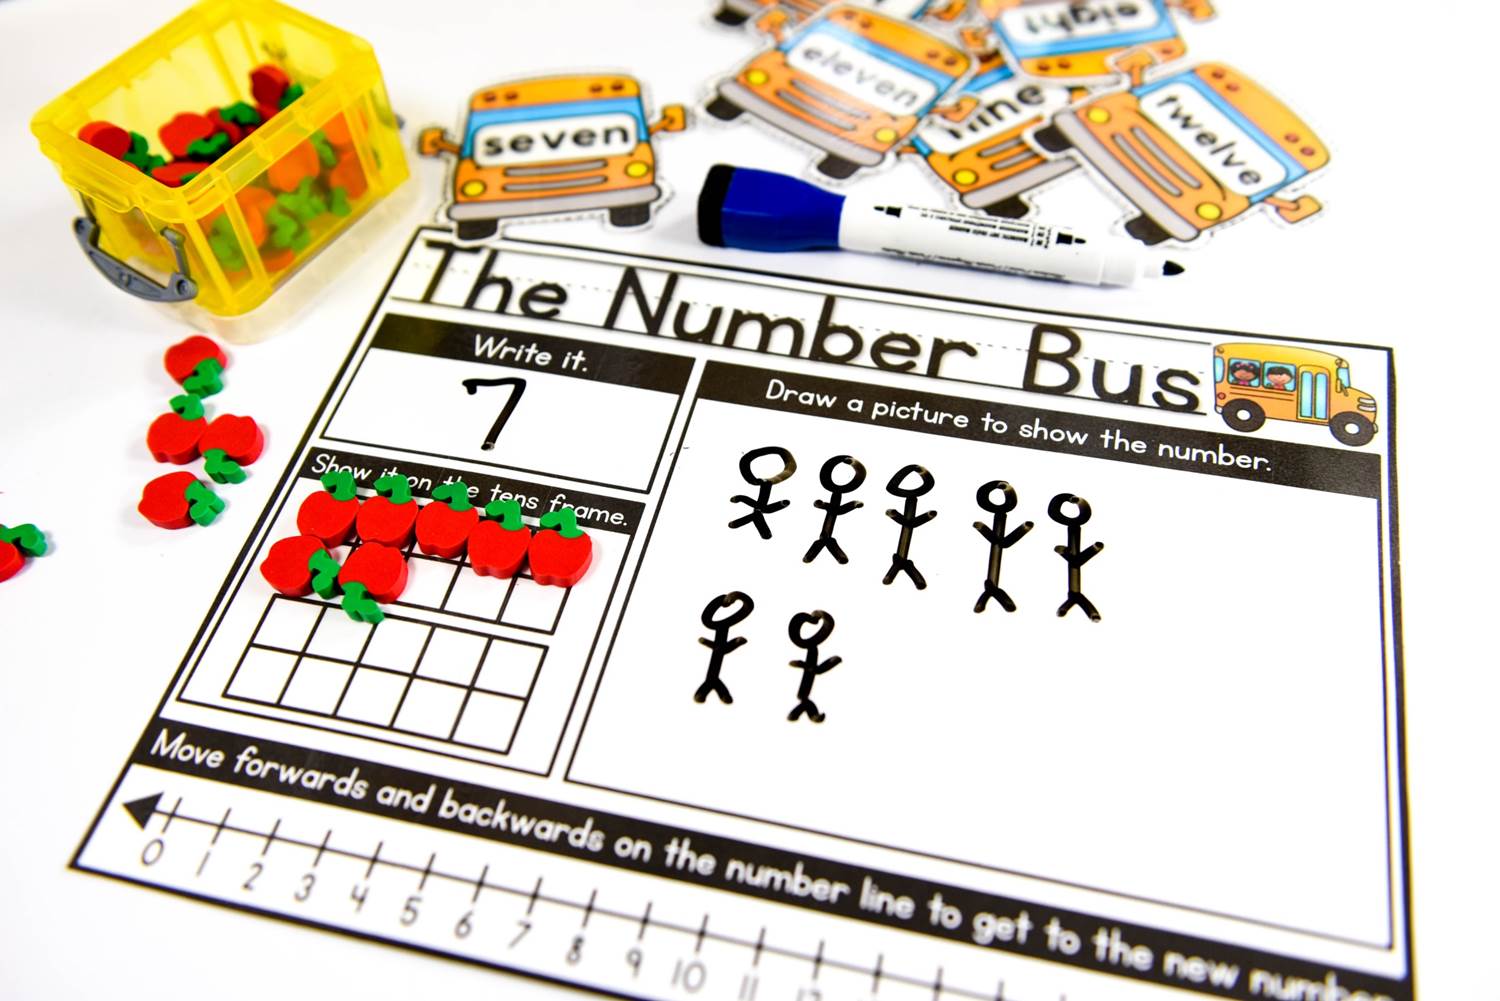 The number bus morning work activity